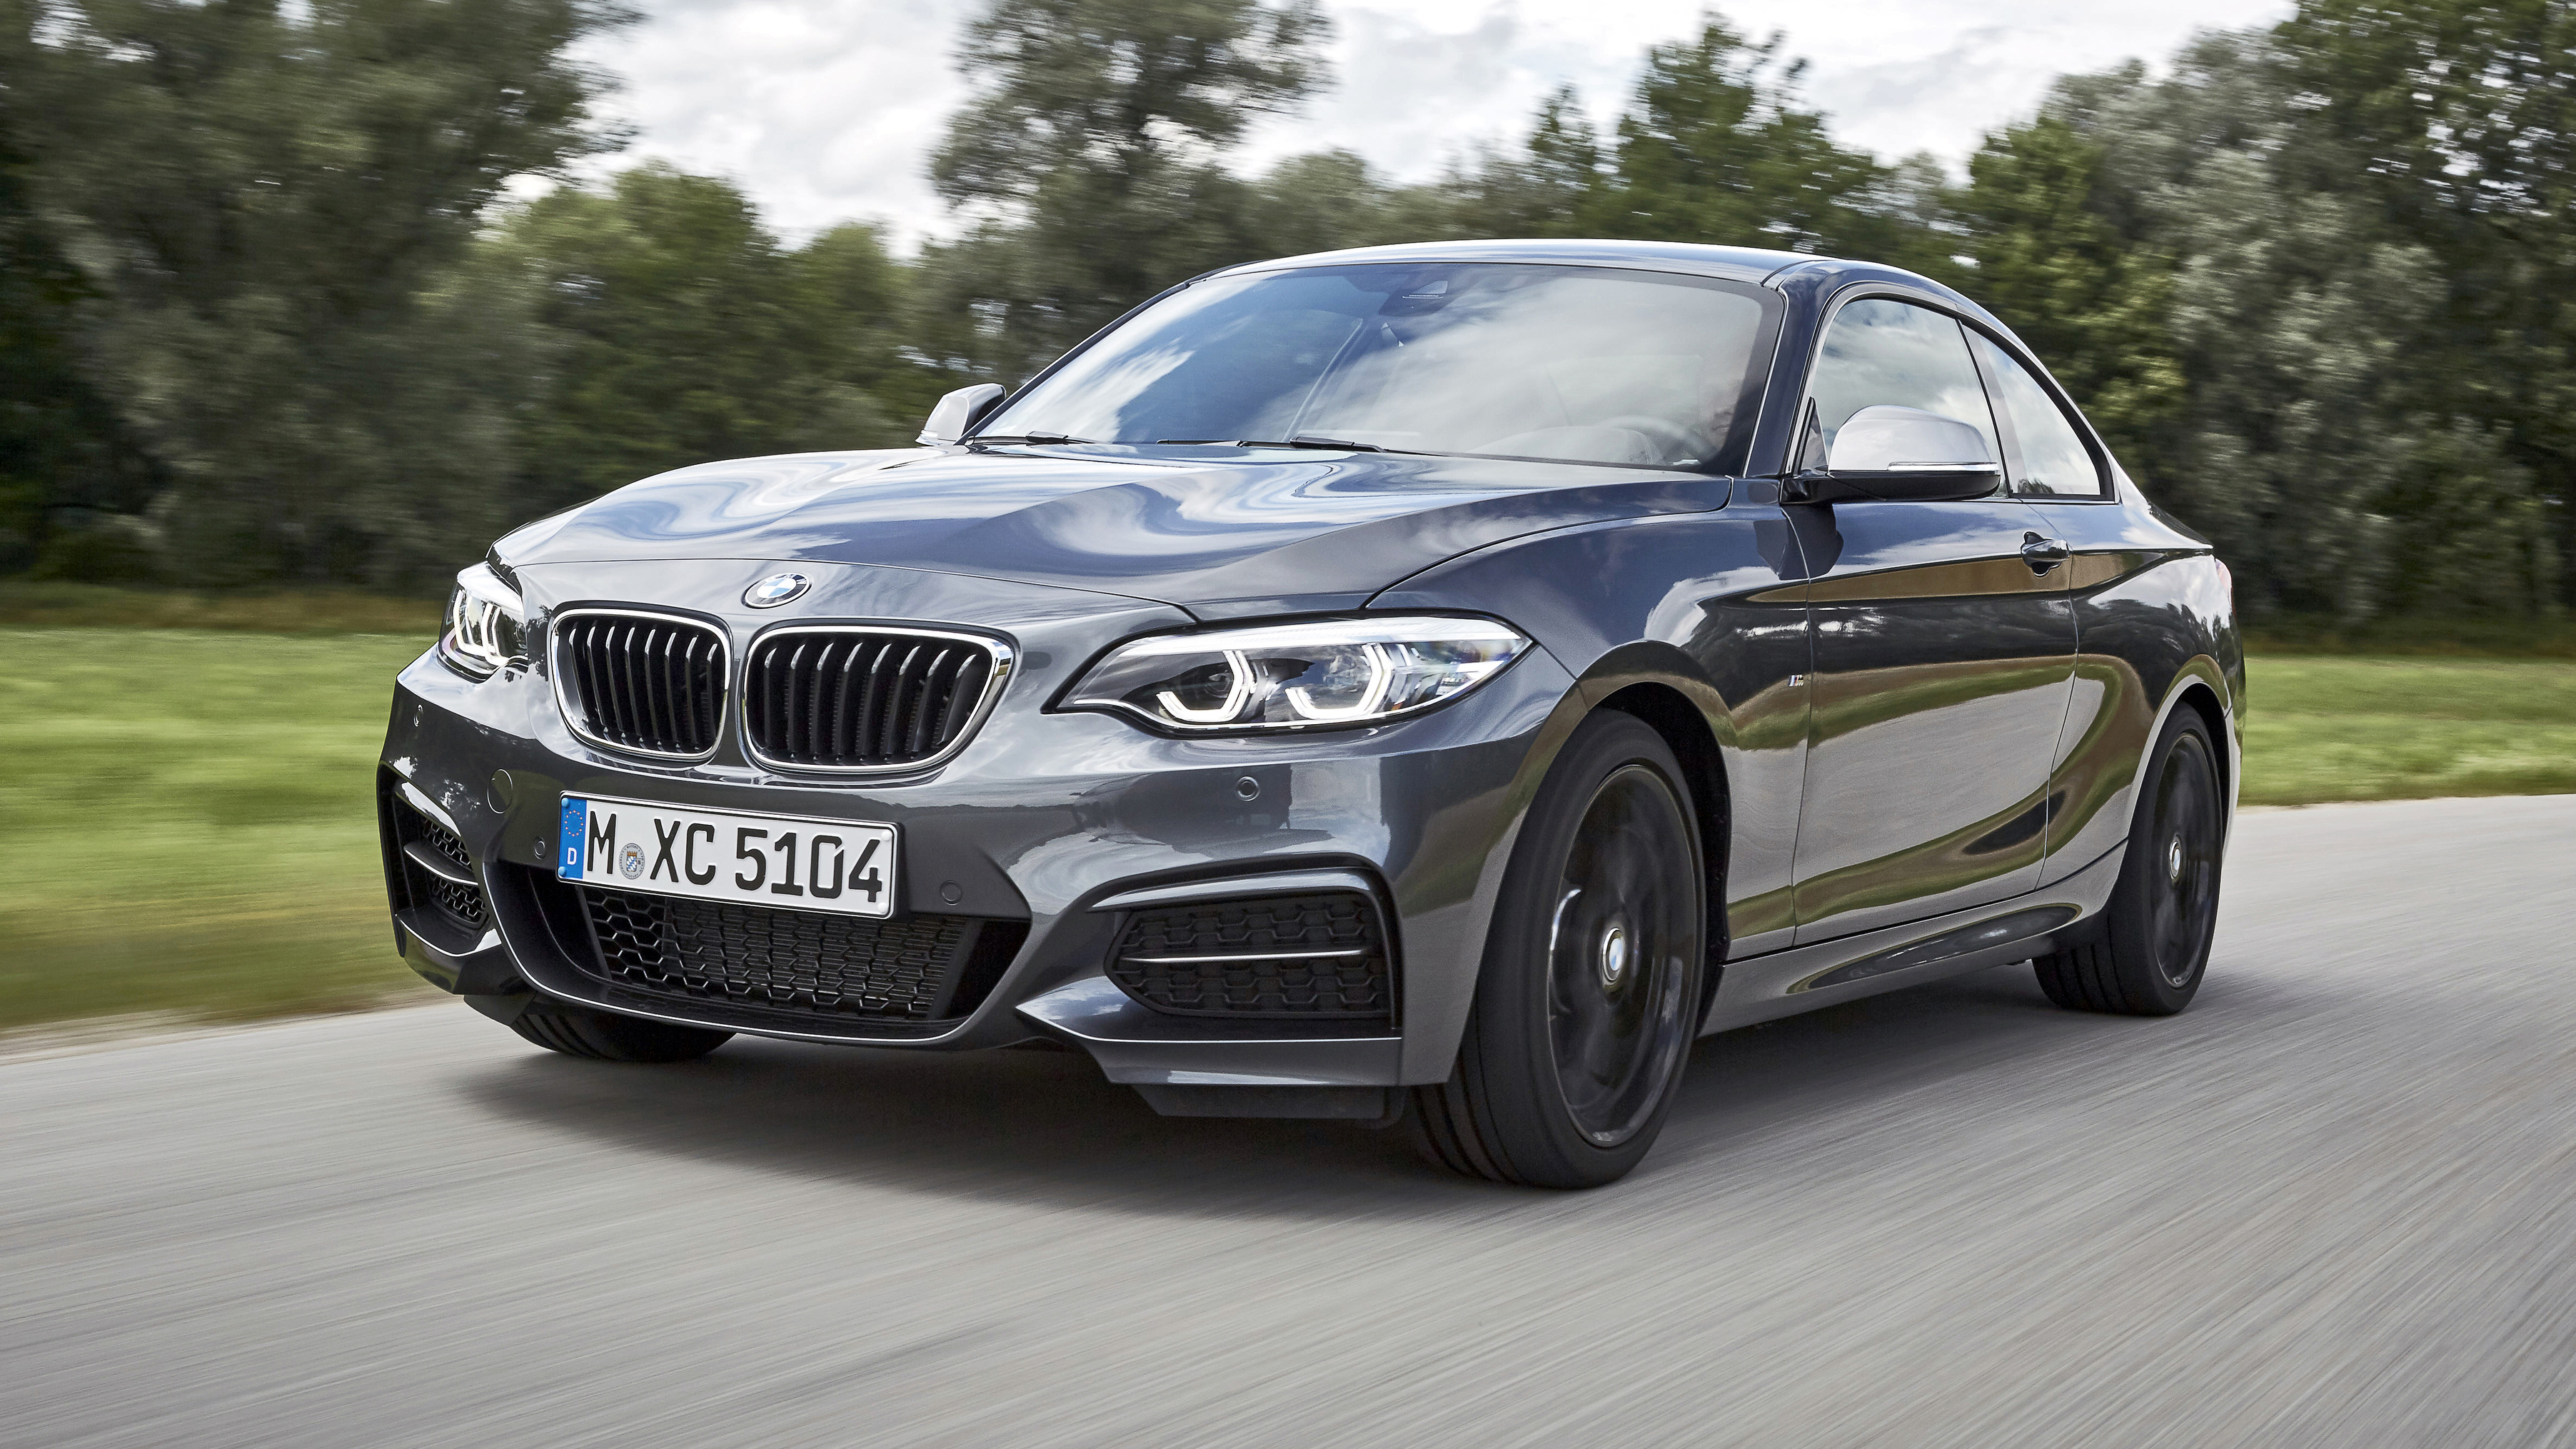 BMW M240i xDrive review: 335bhp AWD coupe tested Reviews 2023 | Top Gear